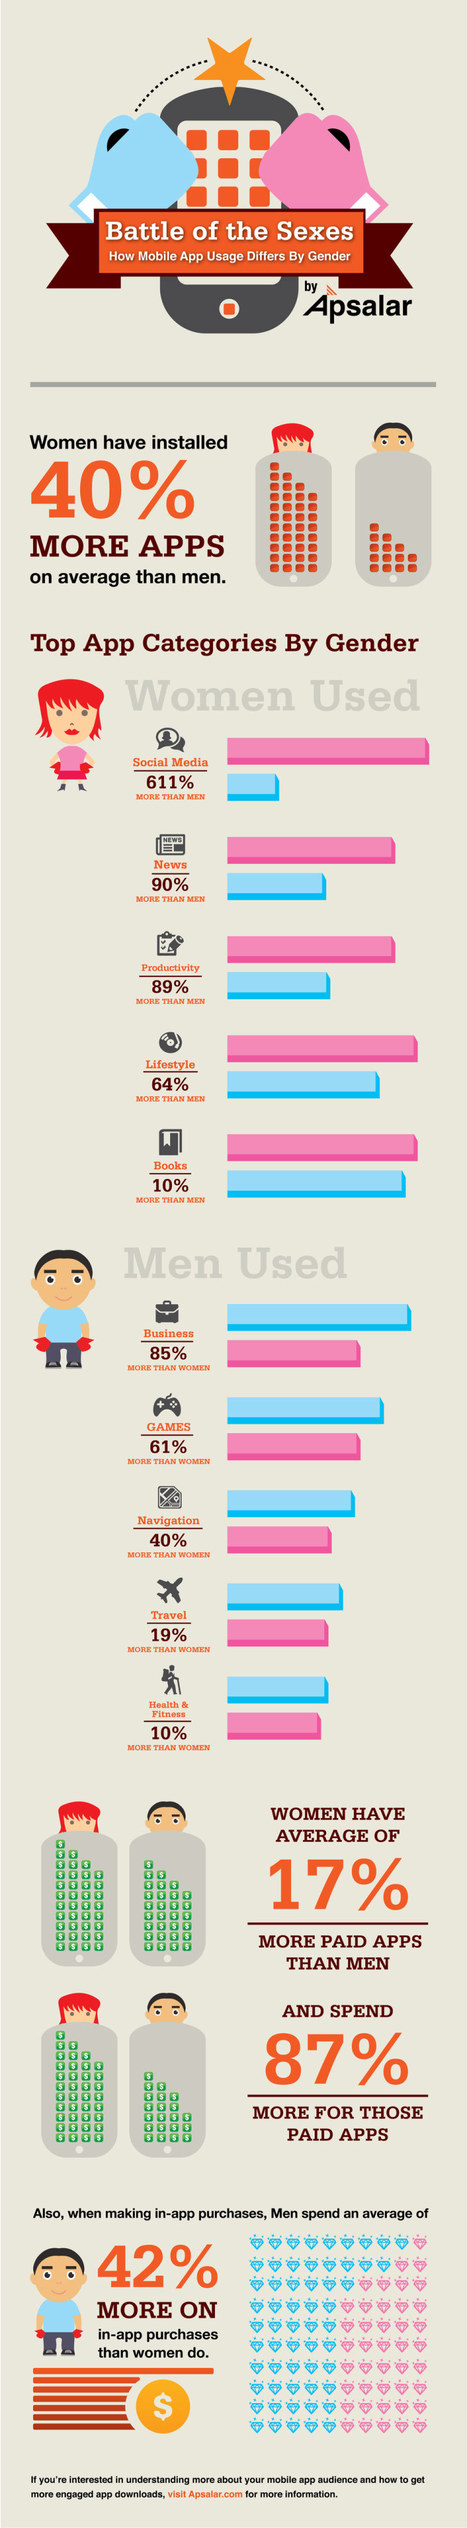 Smartphone App Usage: Develop Female Appealing App To Make More Money! | Mobile Technology | Scoop.it